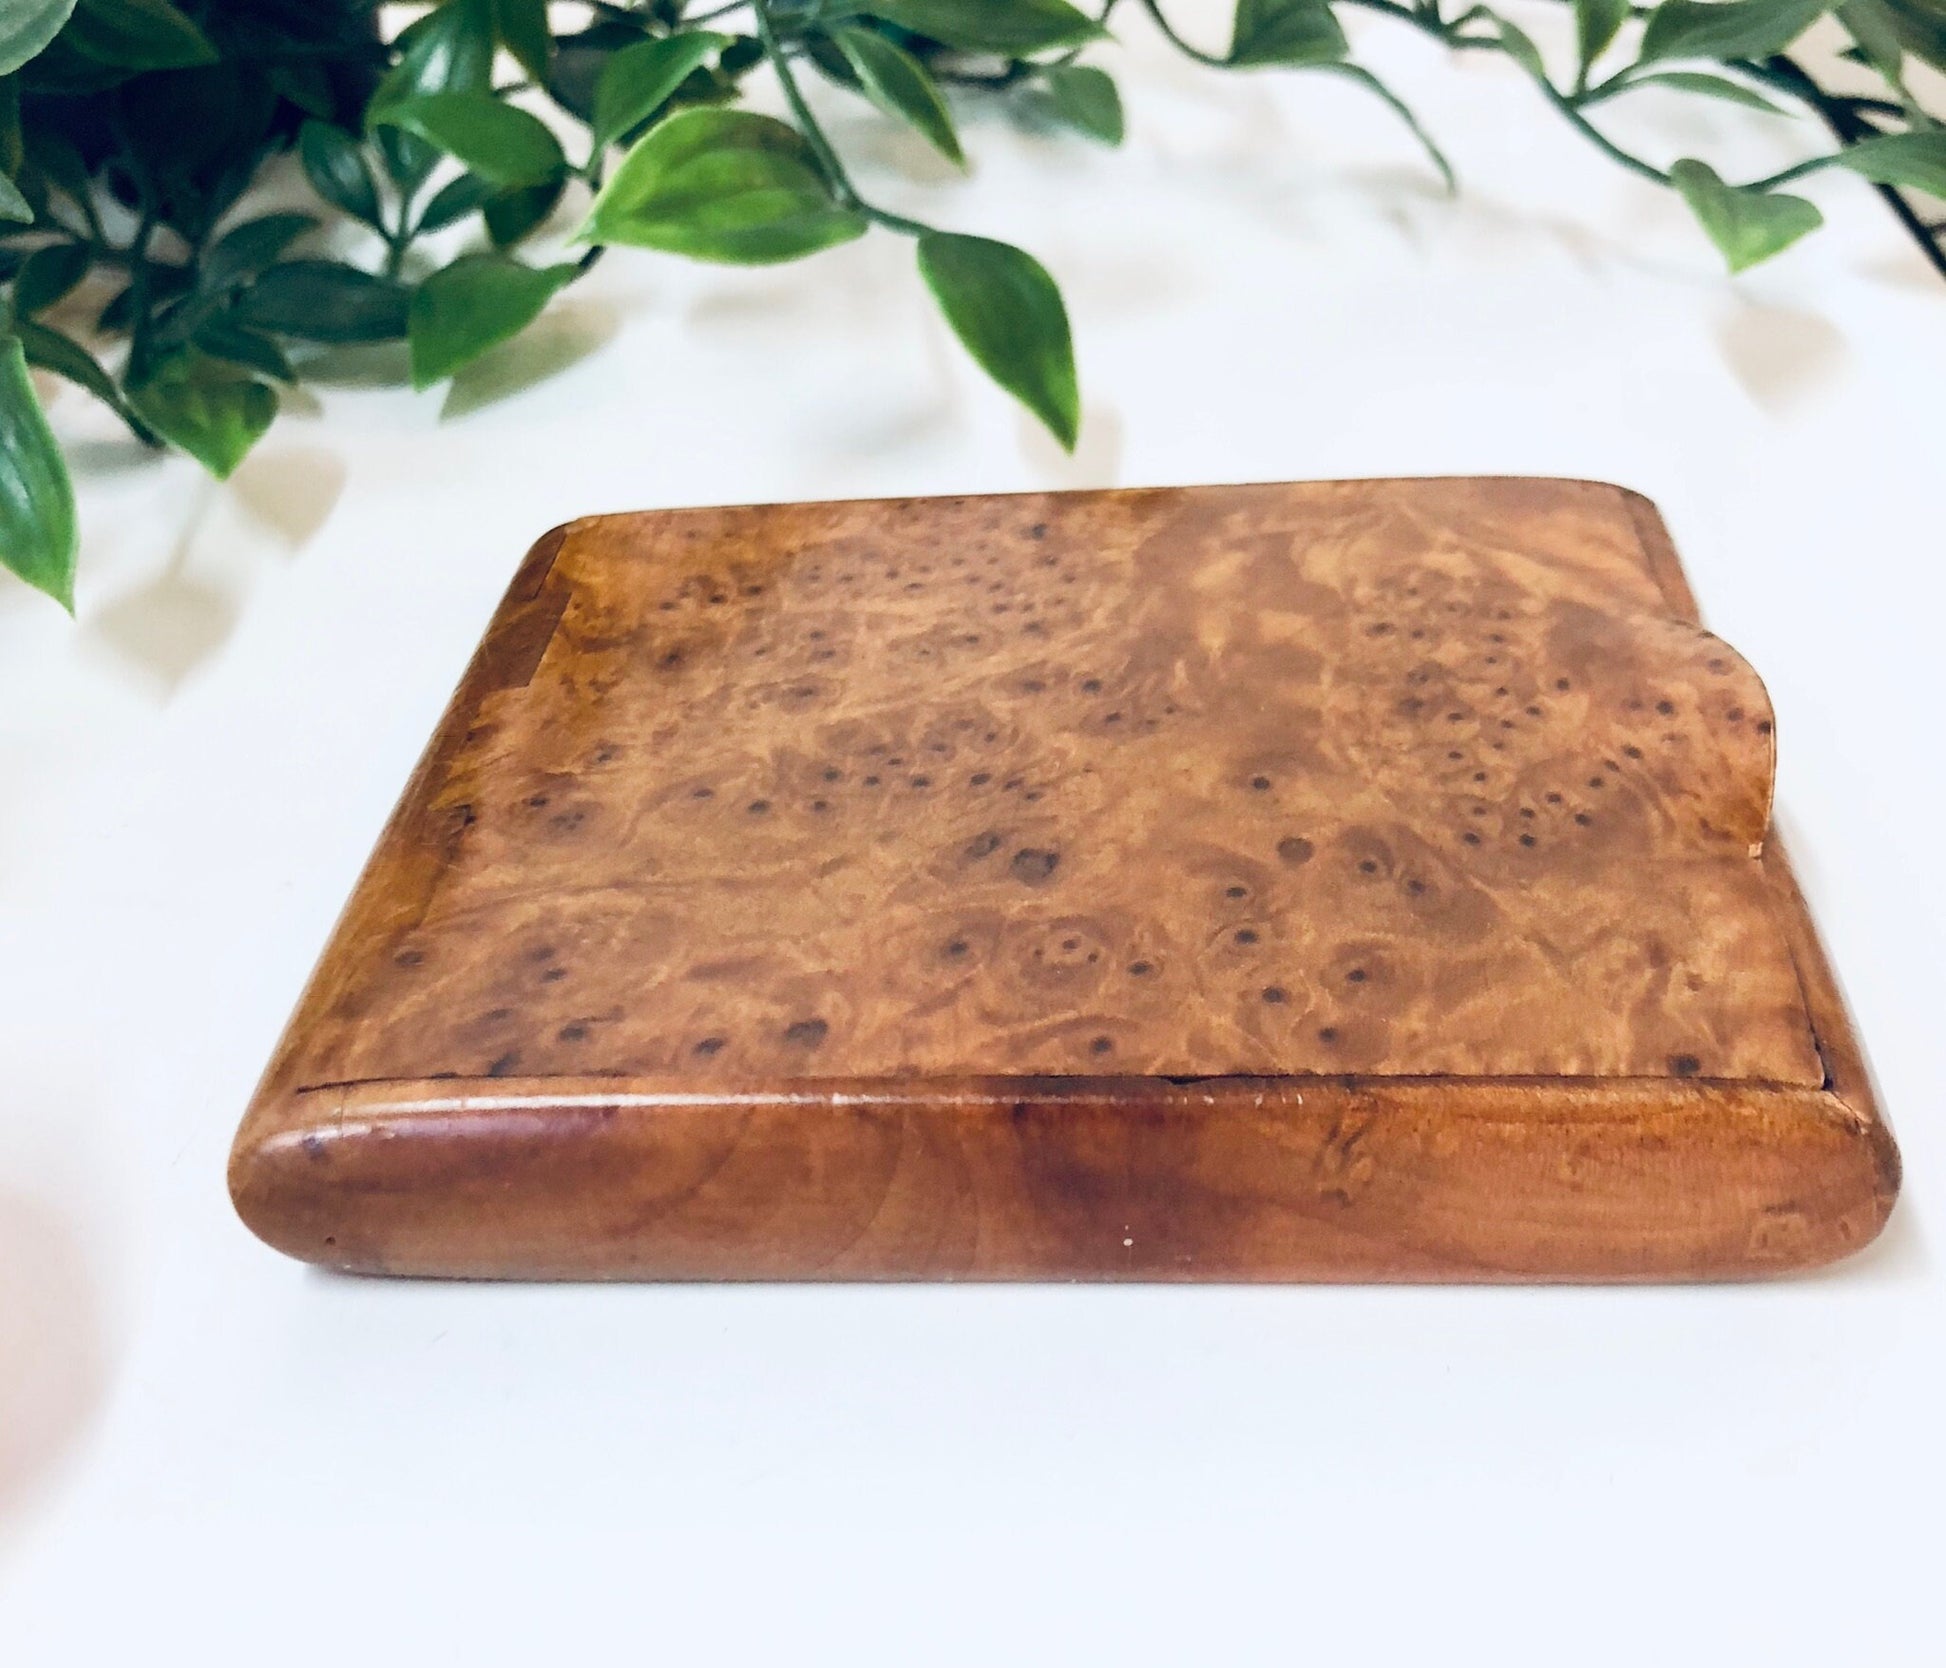 Vintage wooden hinged box with light brown burl wood grain pattern, suitable for use as a cigarette case, business card holder, or small container, surrounded by green leaves